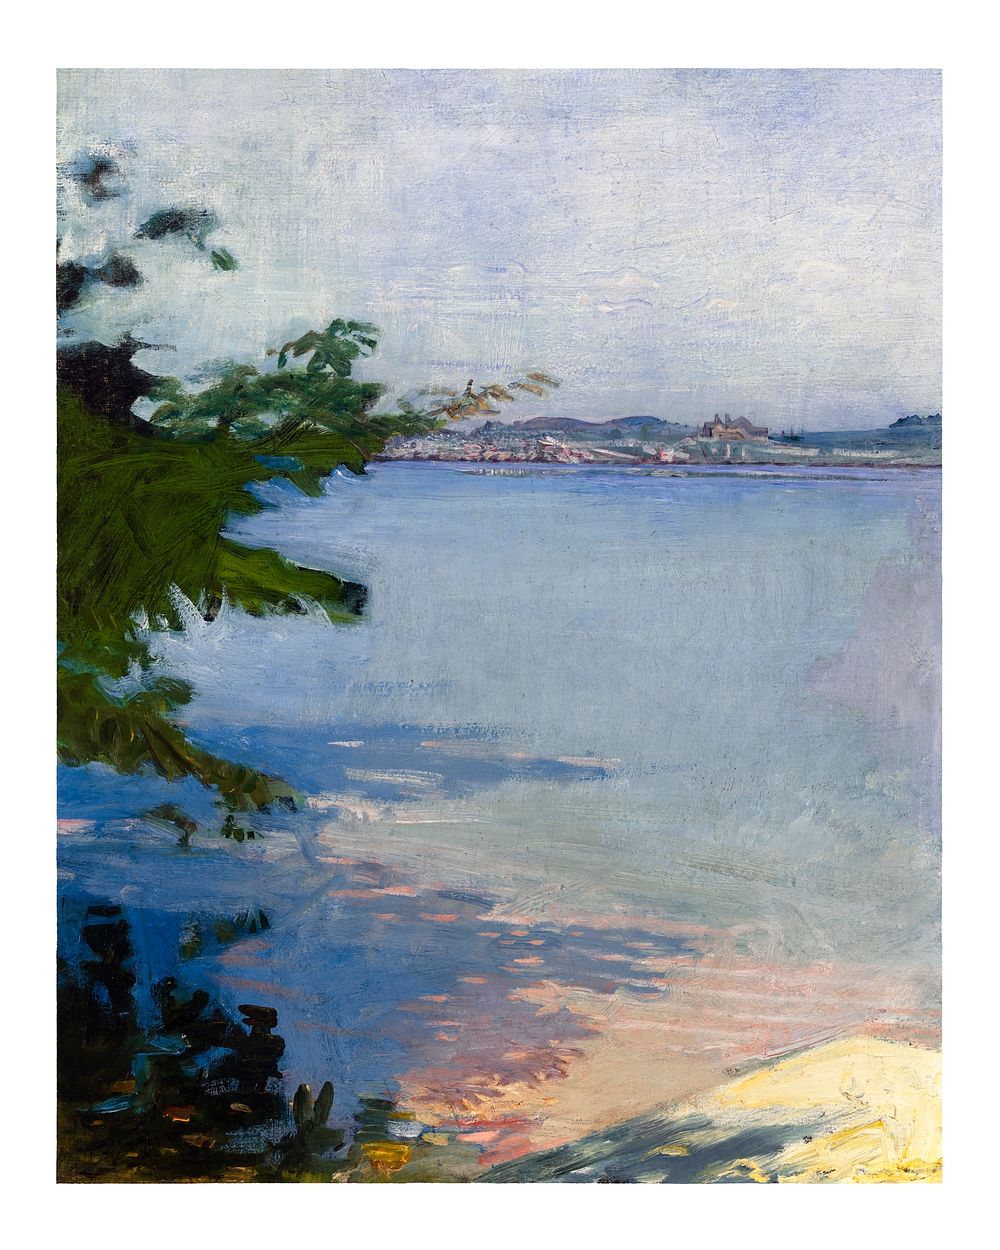 Dublin Pond art print (1894) painting in high resolution by Abbott Handerson Thayer. Original from the Smithsonian…